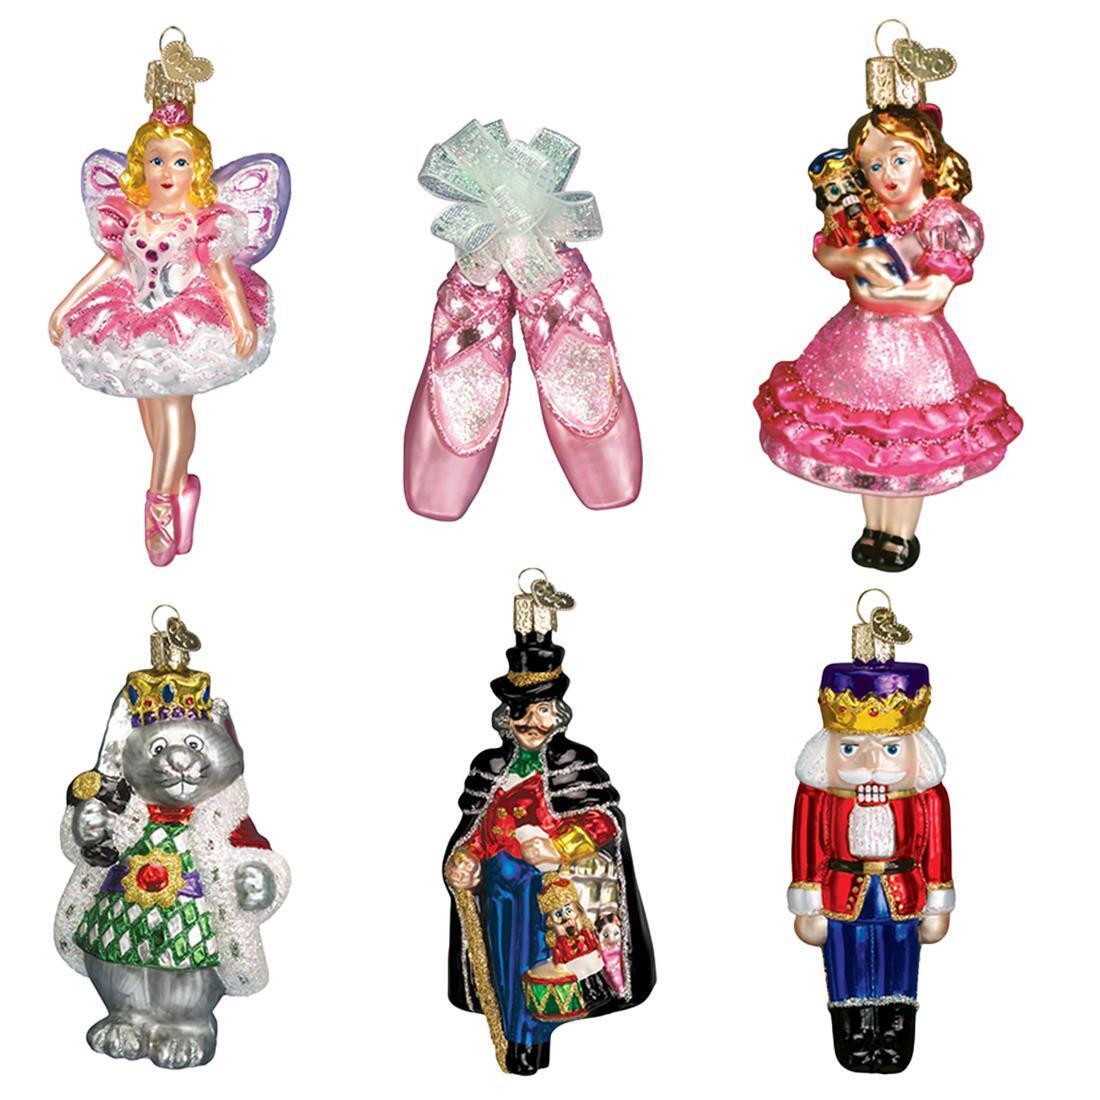 Old World Christmas Nutcracker Suite Collection Hanging Orn Set of 6 14013-OWC